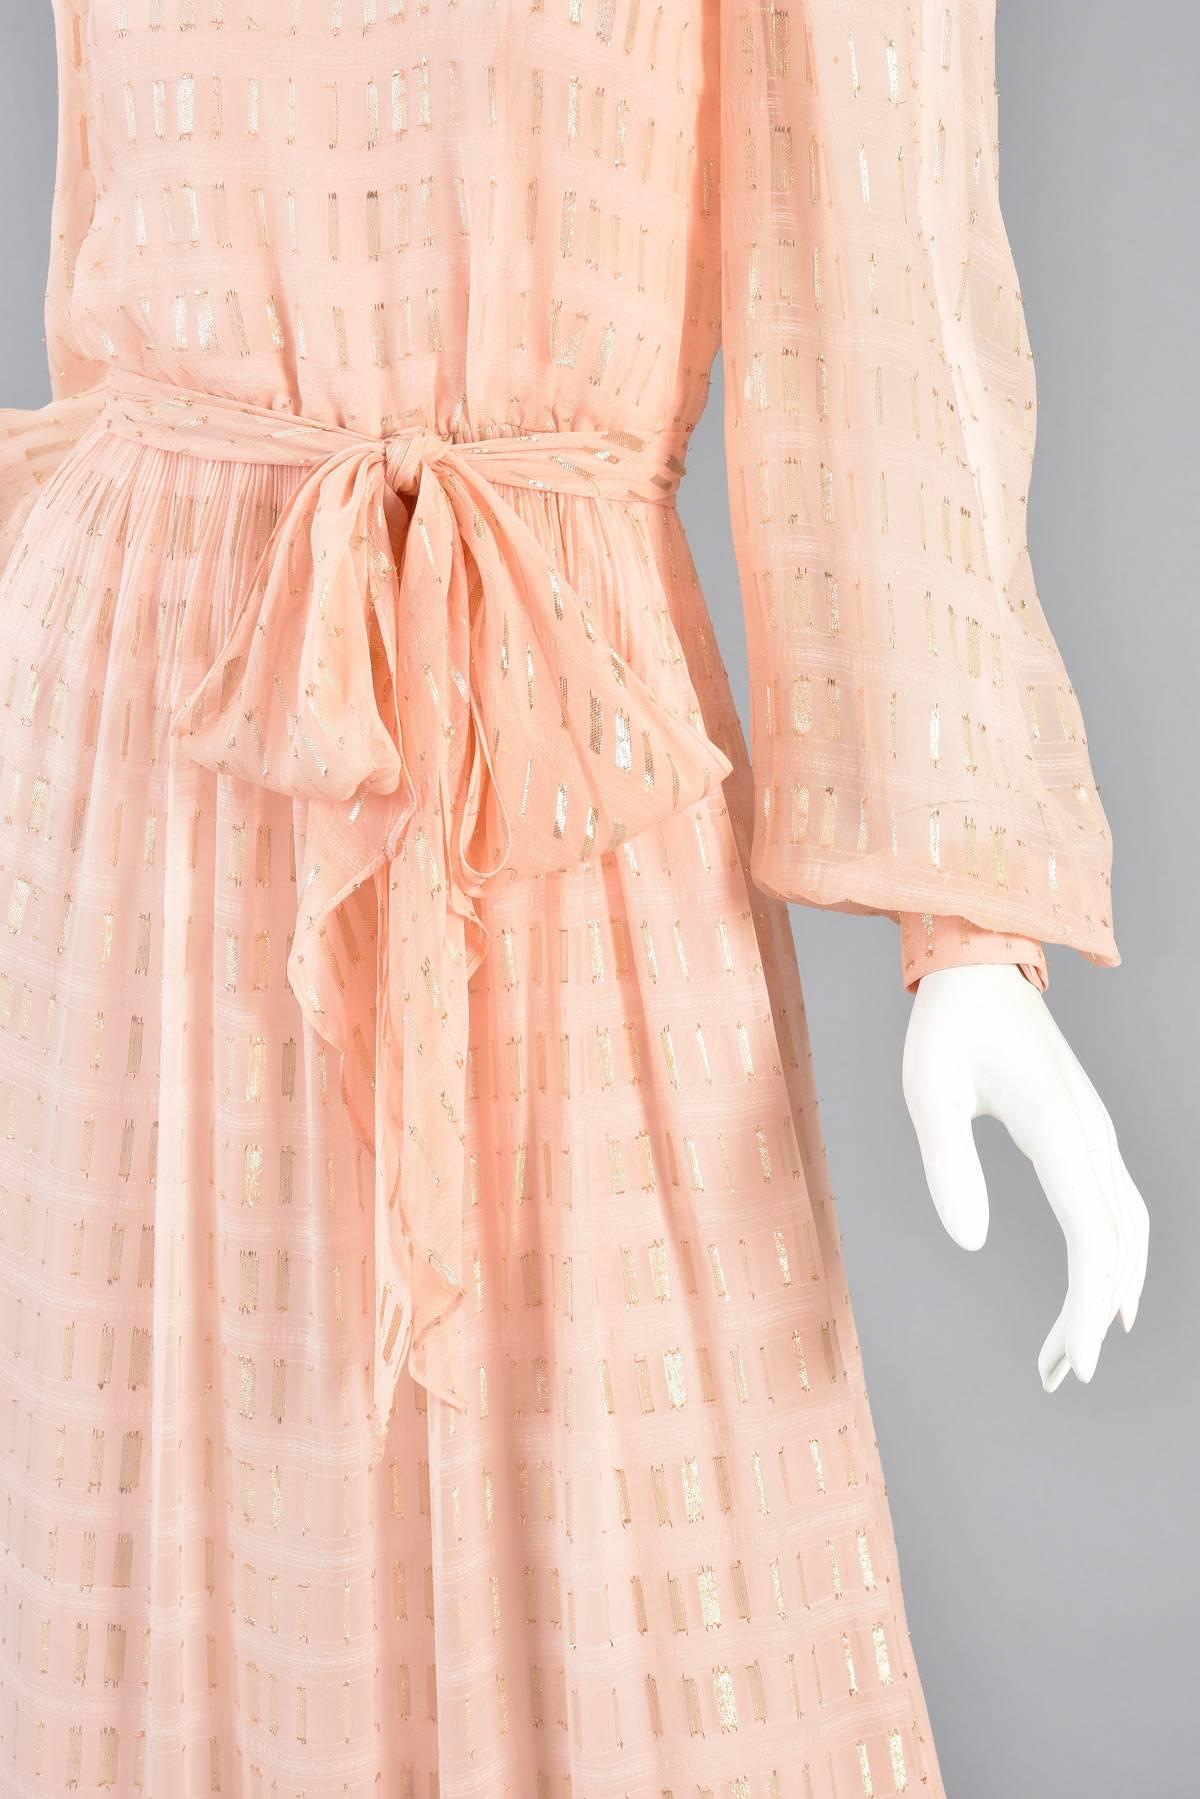 1960s Nat Kaplan Couture Peach Silk Dress with Gold Lurex Threads Throughout For Sale 2